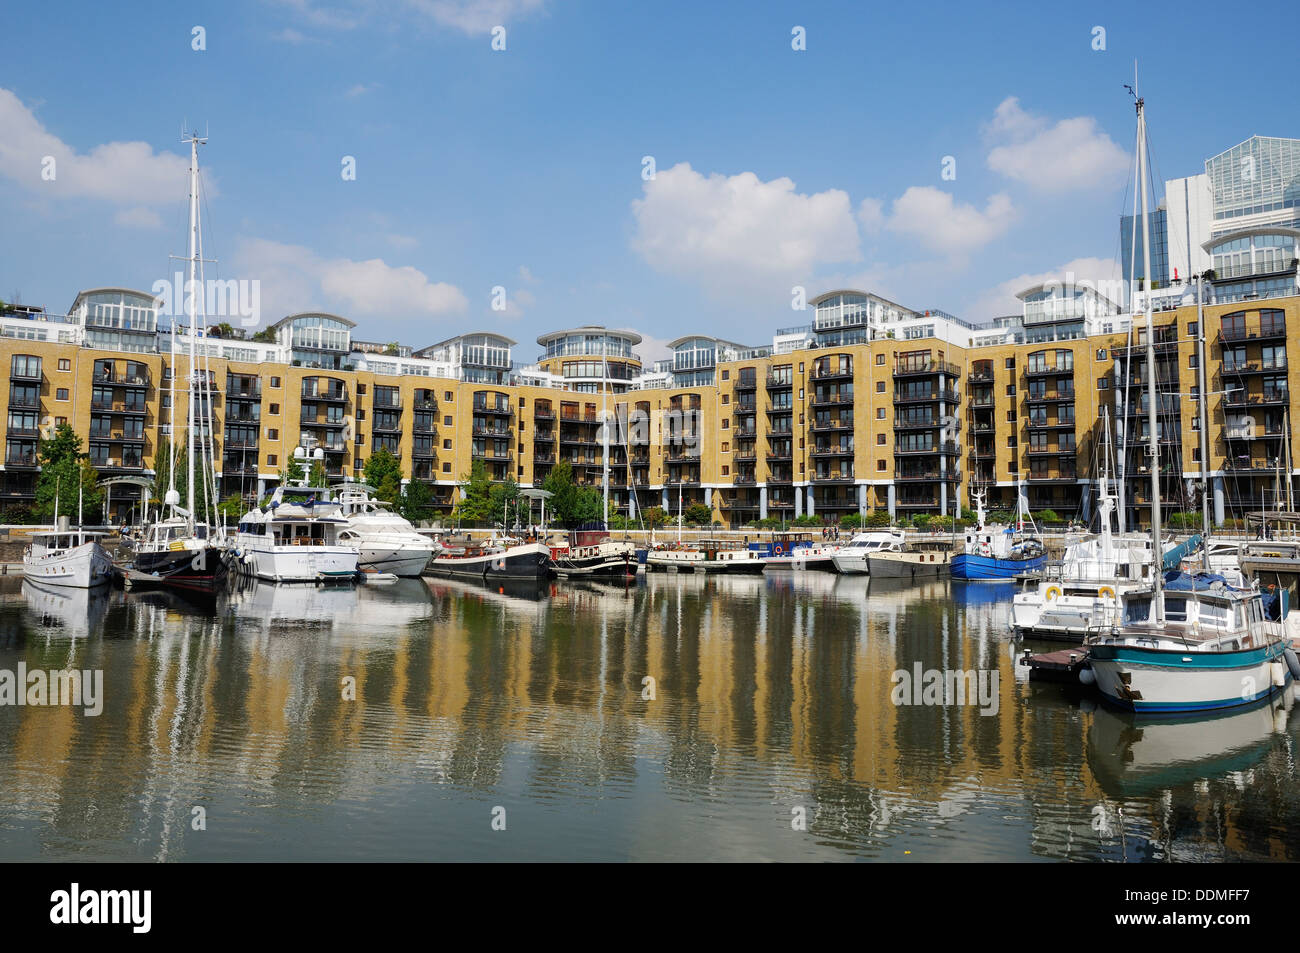 St Katherine Docks, Tower Hamlets, London UK, with apartment buildings and yachts Stock Photo